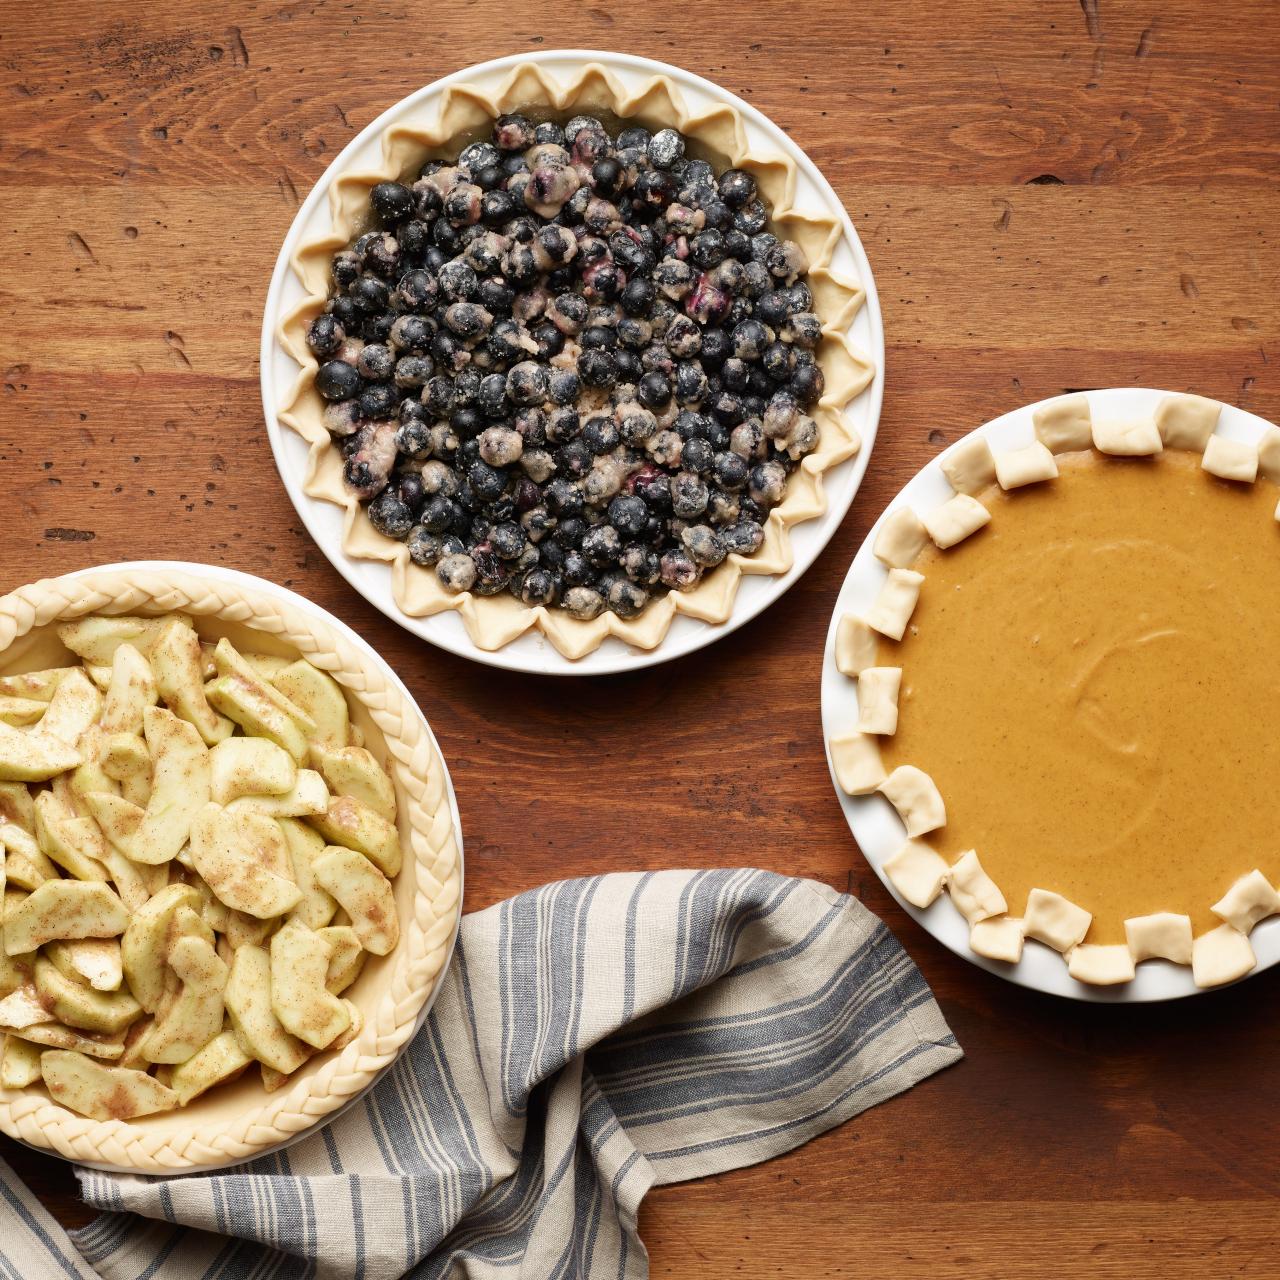 6 Best Pie Making Tools - Pie Crust and Decorating Utensils and How to Use  Them